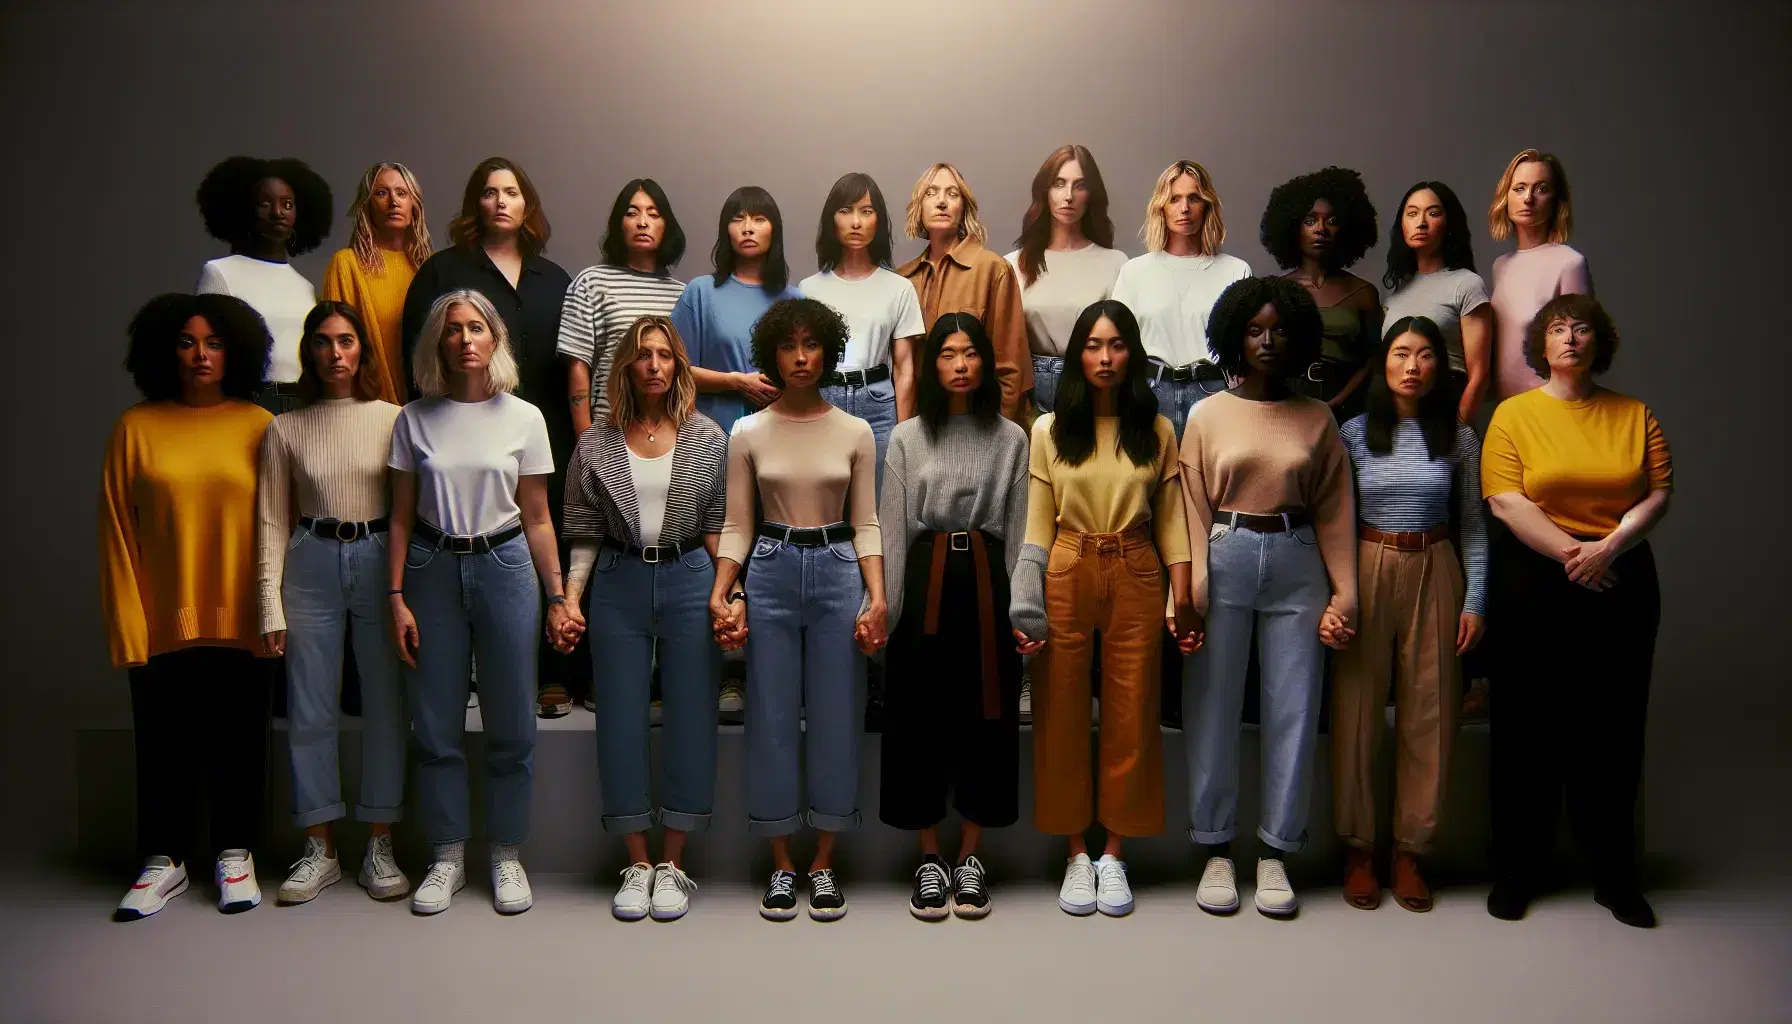 Diverse group of women standing together in solidarity, representing inclusivity and body positivity, with a backdrop promoting unity and support.